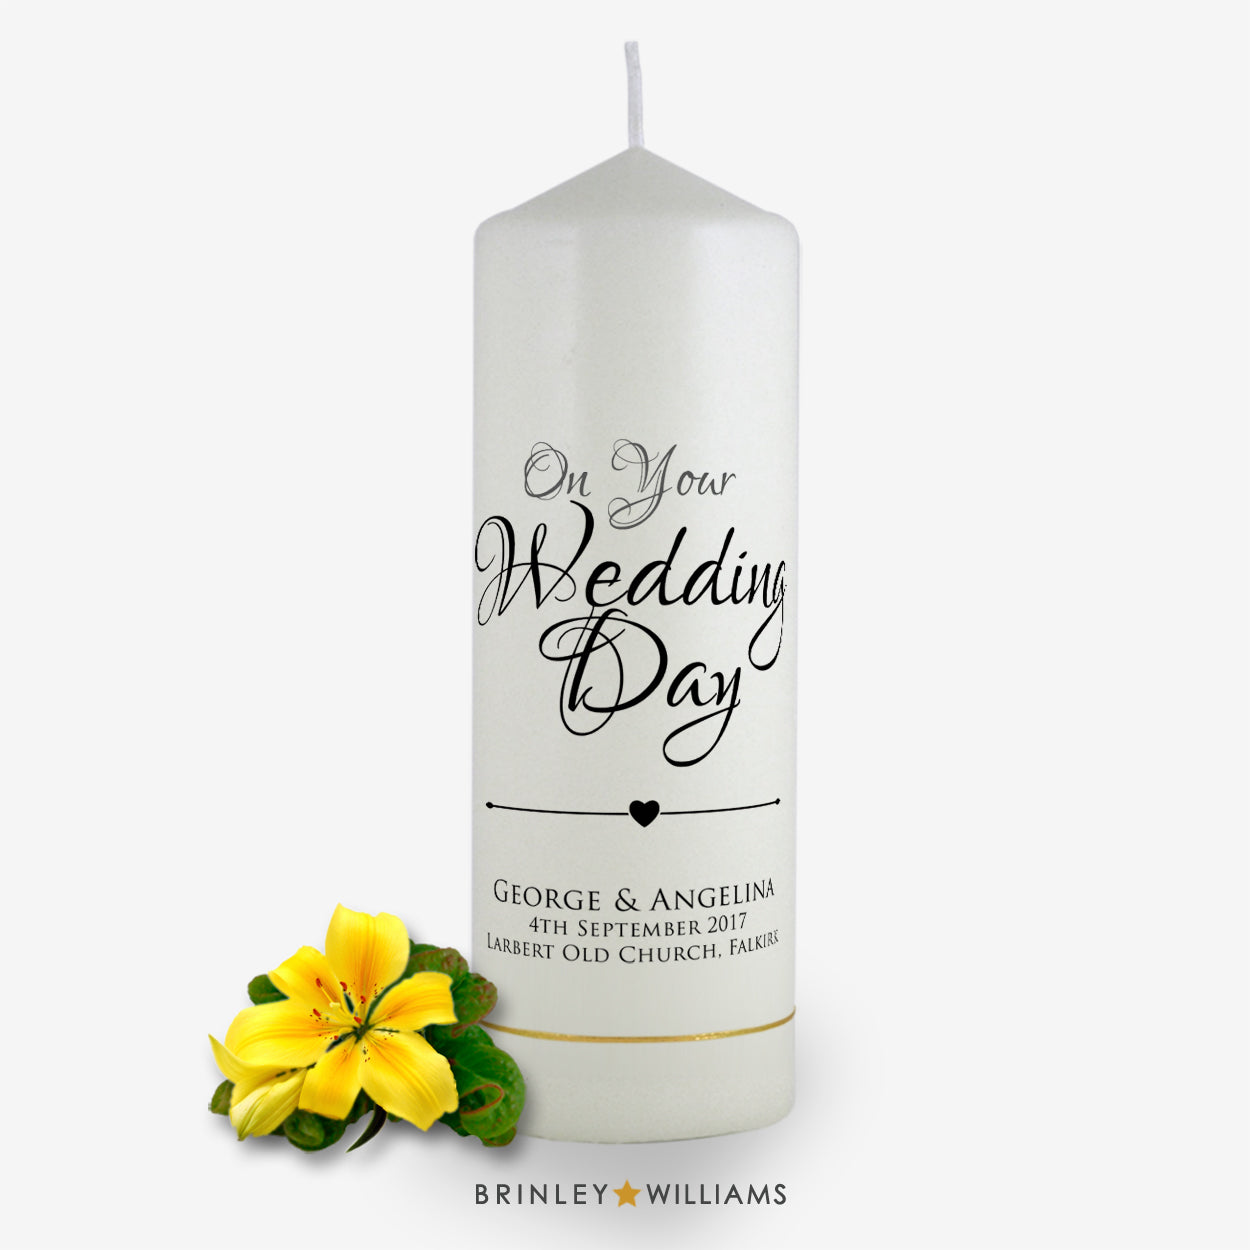 On your Wedding Day Personalised  Candle - Charcoal